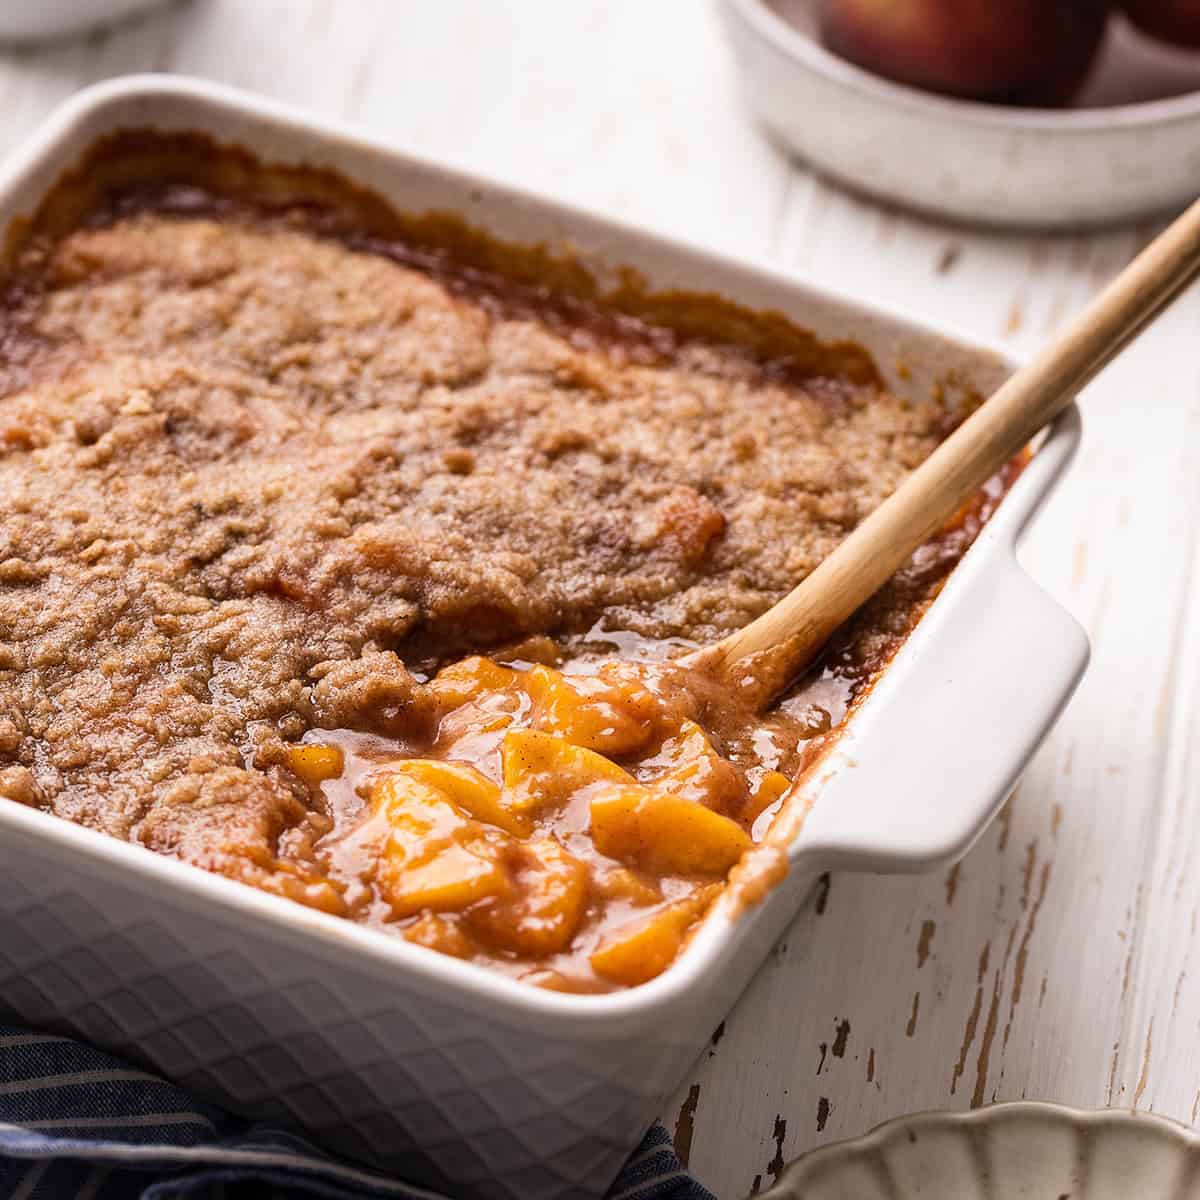 Peach Crumble in a baking dish with a wooden spoon serving a portion